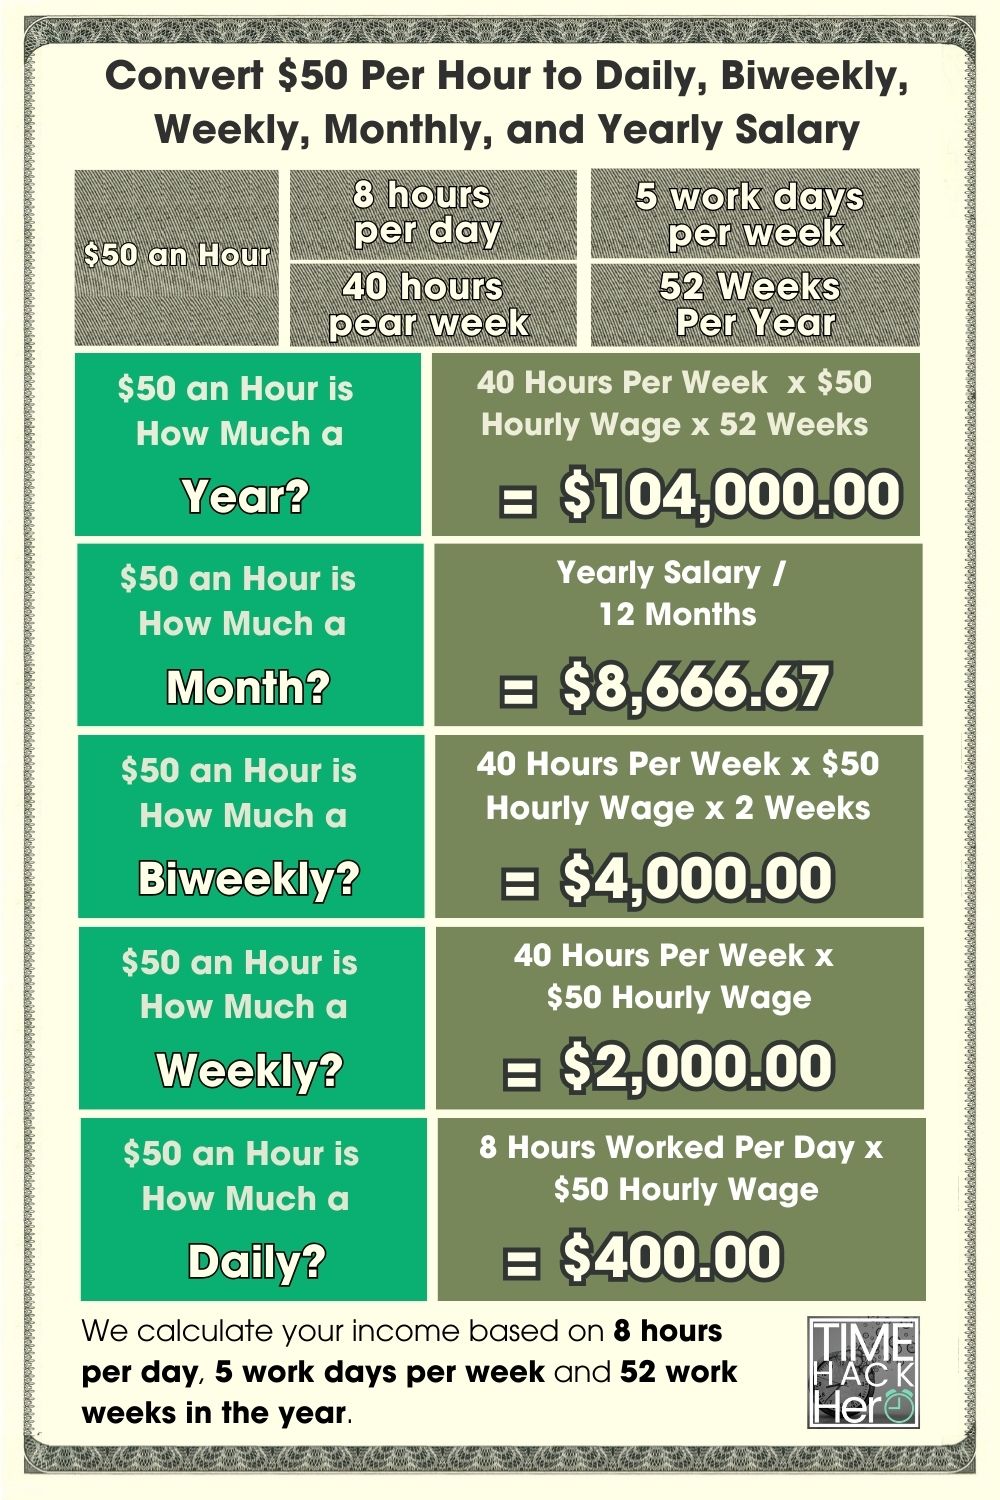 Convert $50 Per Hour to Daily, Biweekly, Weekly, Monthly, and Yearly Salary